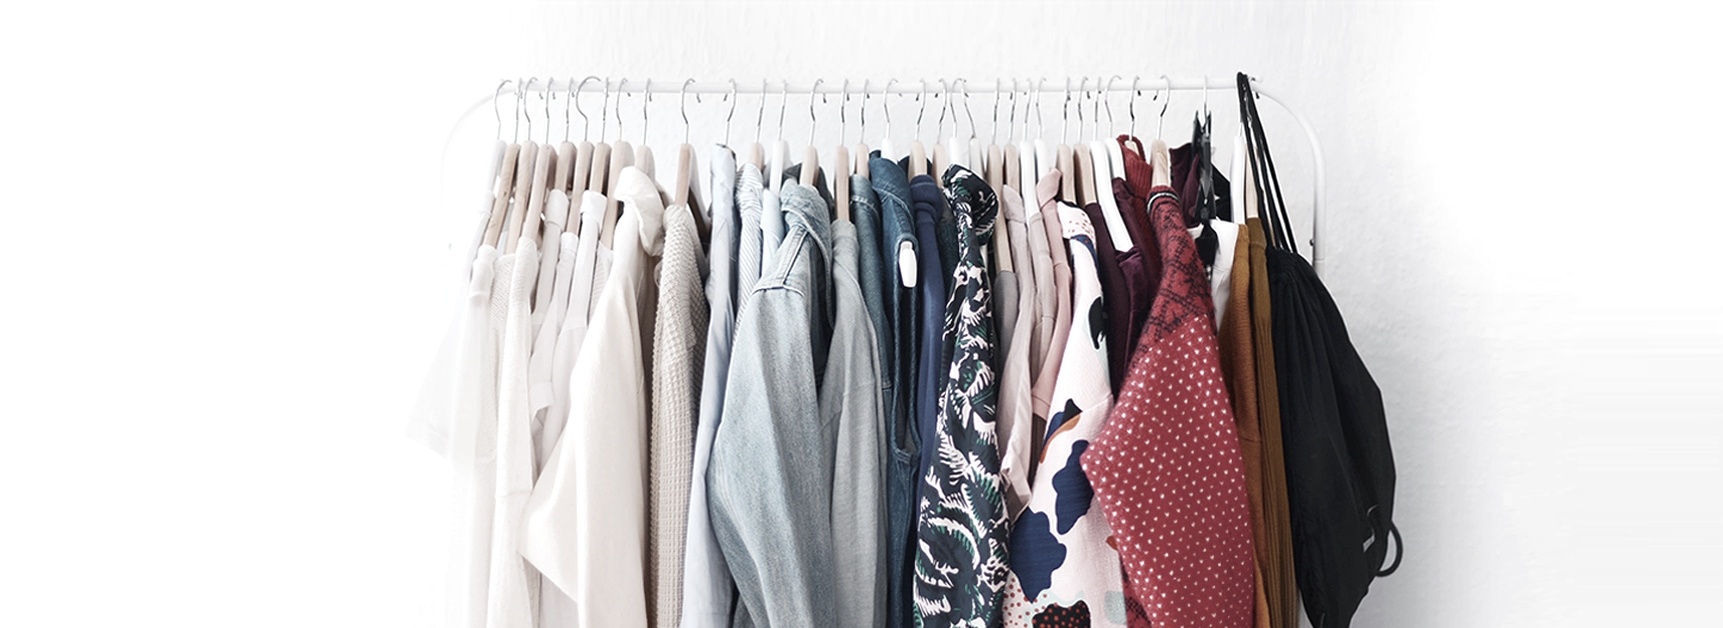 How To Find High Quality Boutique Wholesale Clothing Supplier : 10 Tips To Supply Your Small Business in 2020